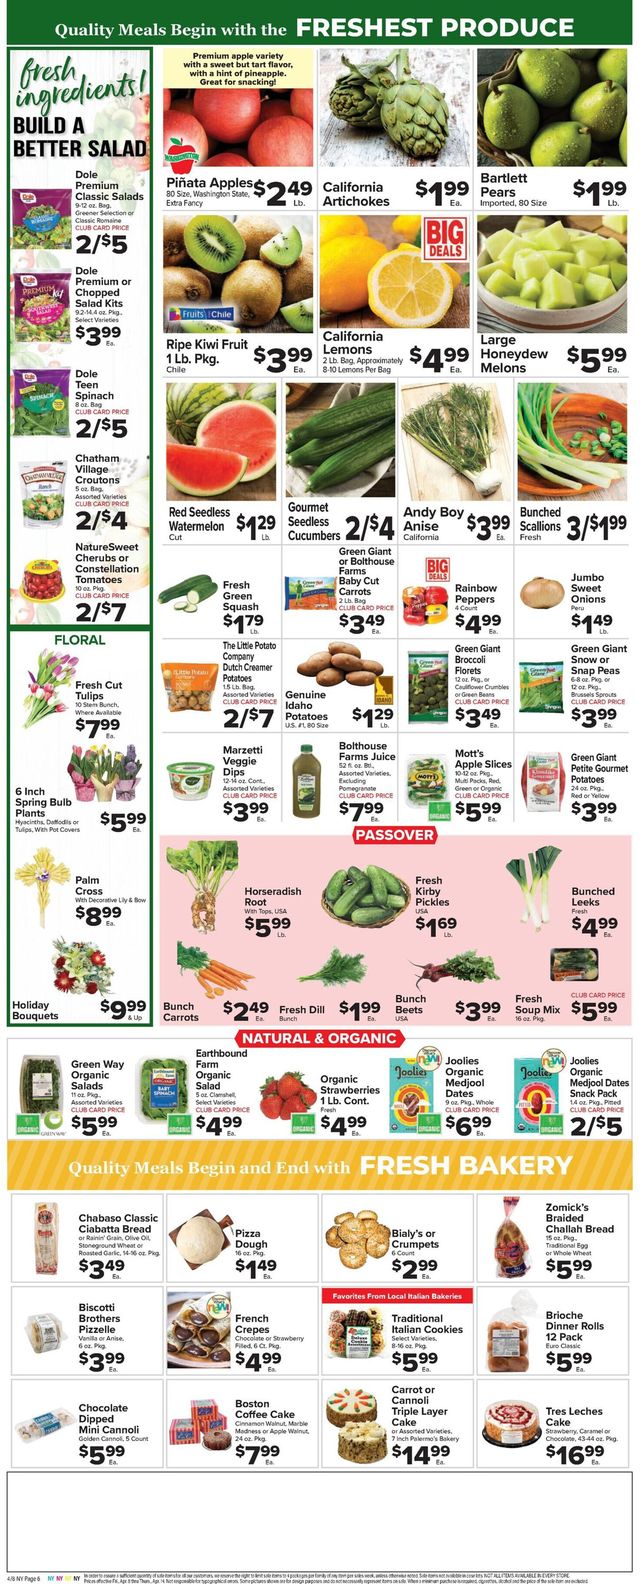 Foodtown Ad from 04/08/2022